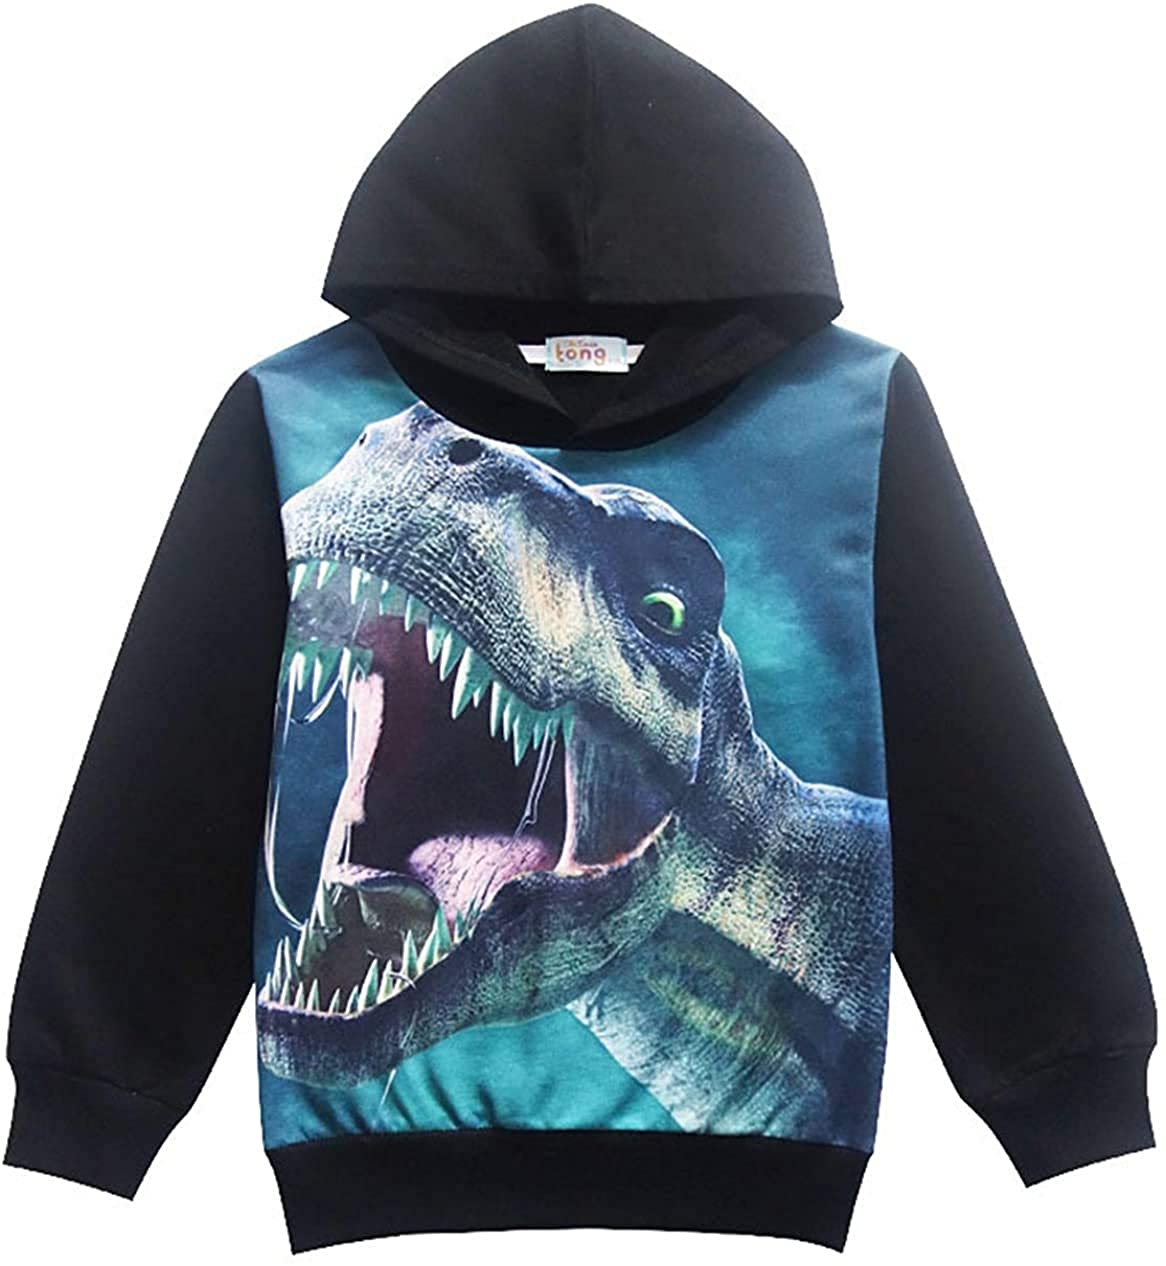 Toddler Boys Clothes 2T 3T 4T 5T Dinosaur Zip Up Hoodies Kids Fall Winter Sweatshirt Long Sleeve Hooded Tops with Pocket 